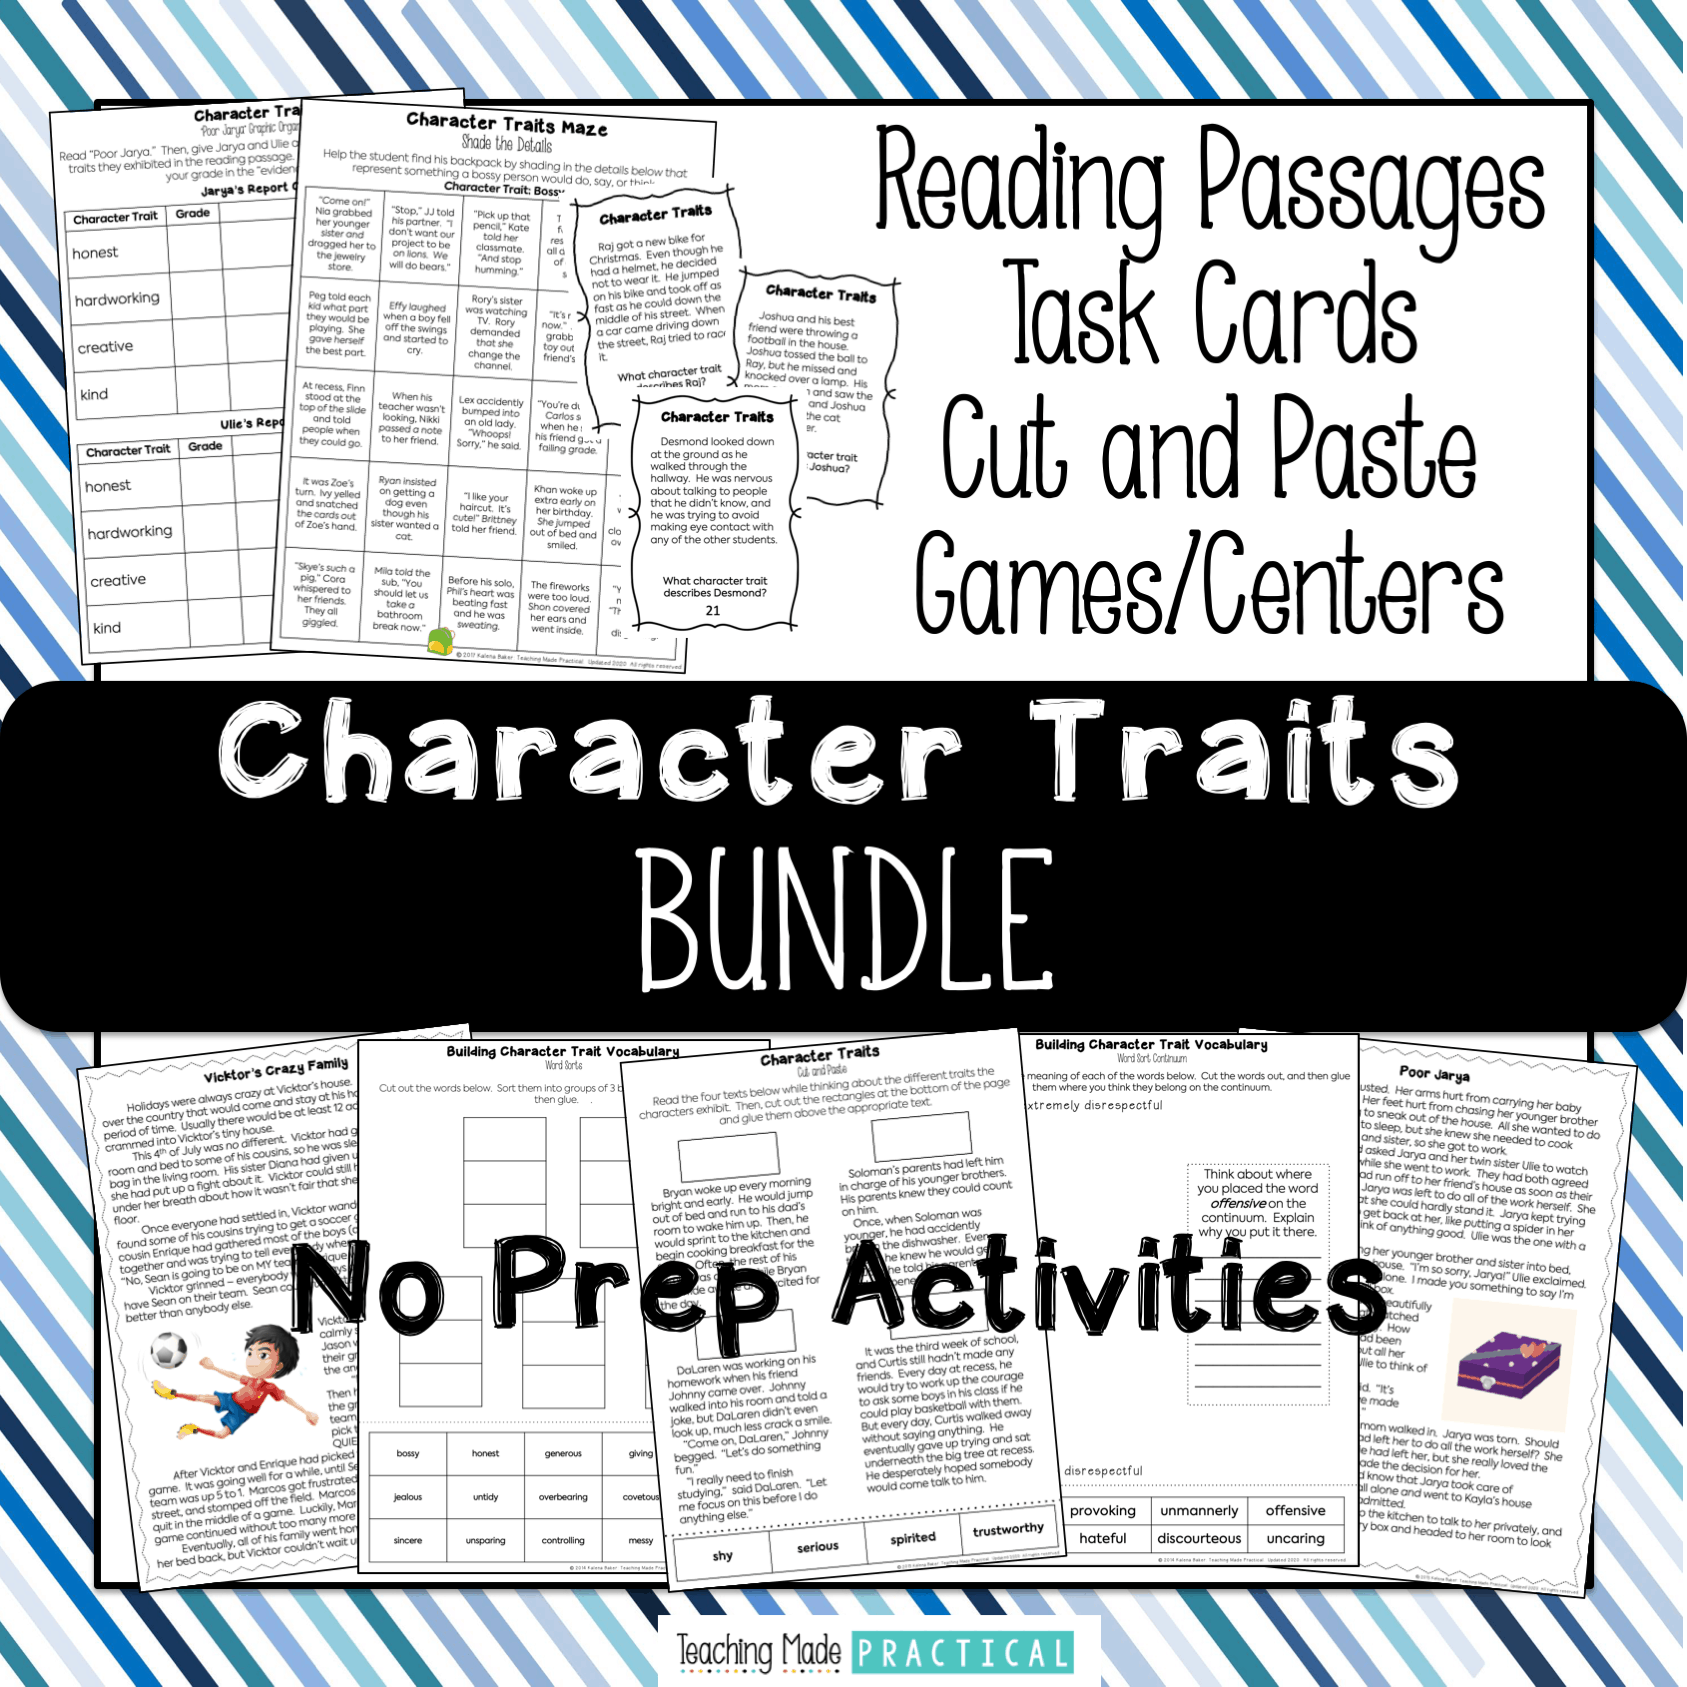 Character Traits bundle- includes task cards, cut and paste activities, reading passages, no prep activities, and more.  Great for third graders and fourth graders to help build their understanding of character traits.  